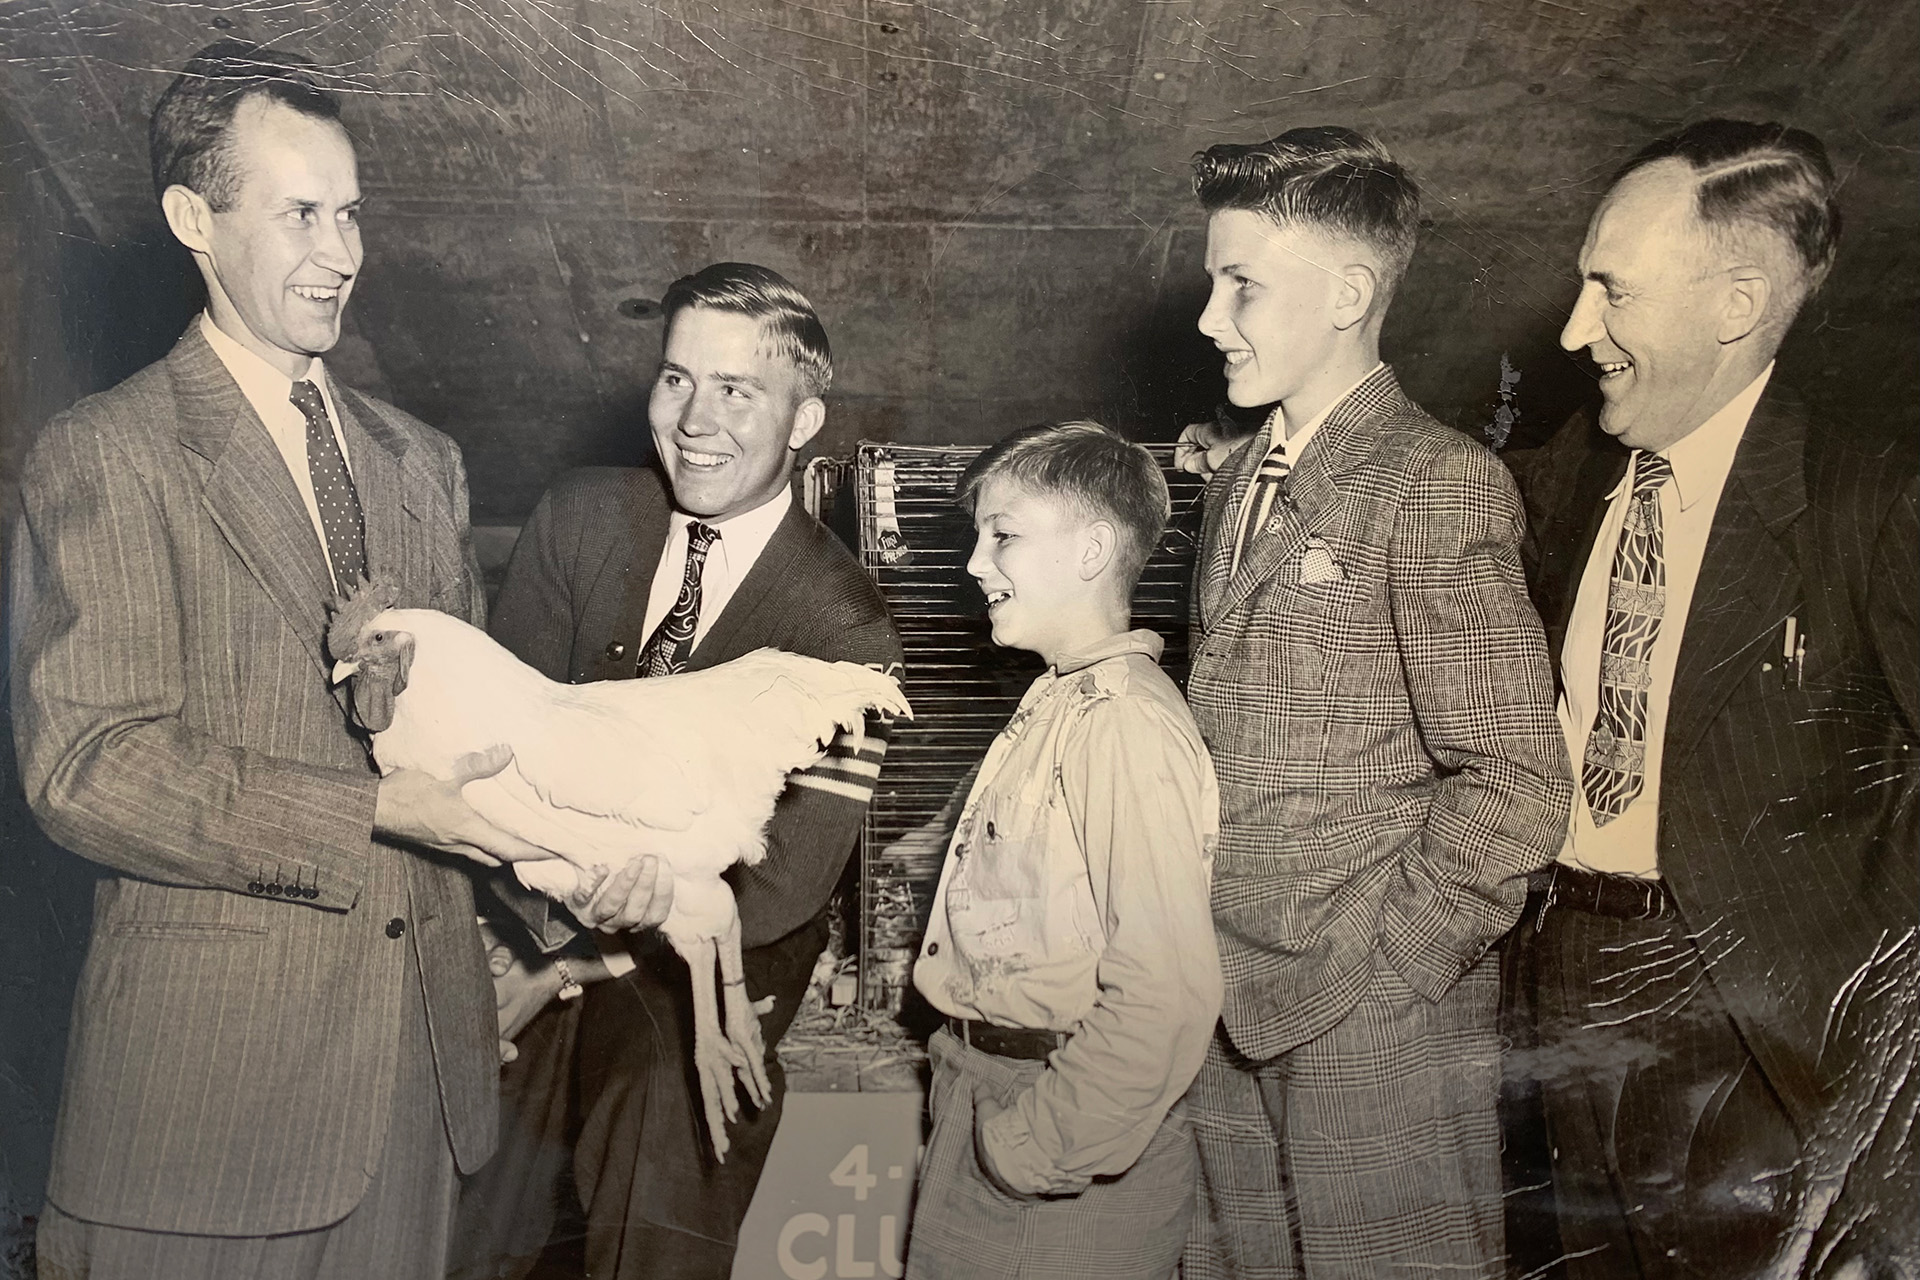 UConn Extension agent and poultry sciences professor William Aho, left, talks with 4-H Club students visiting UConn in the mid-1950s